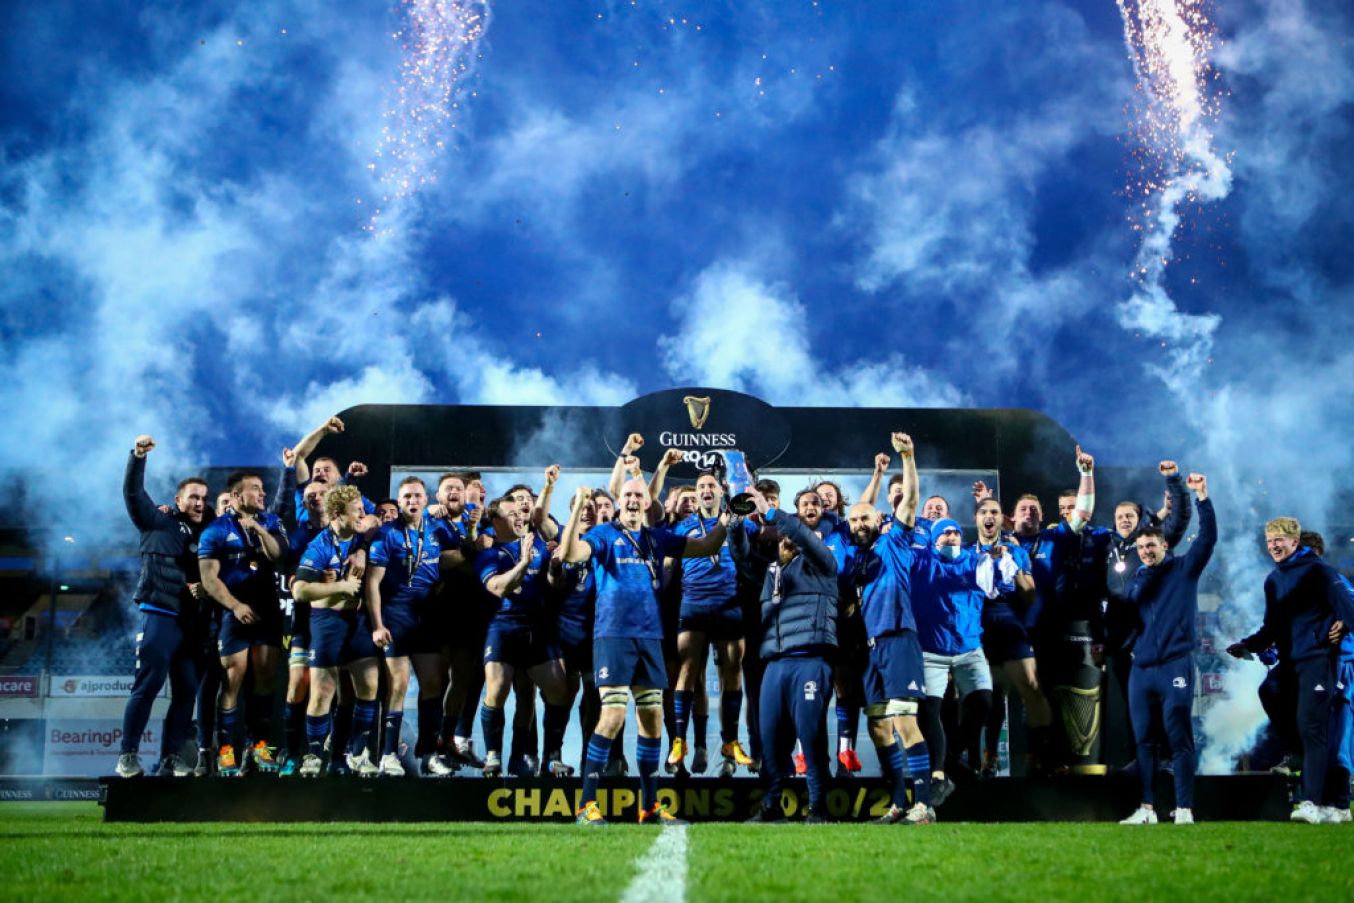 The Leinster Team Celebrate As Guinness Pro14 Champions After Beating Munster In The Final. ©Inpho/James Crombie